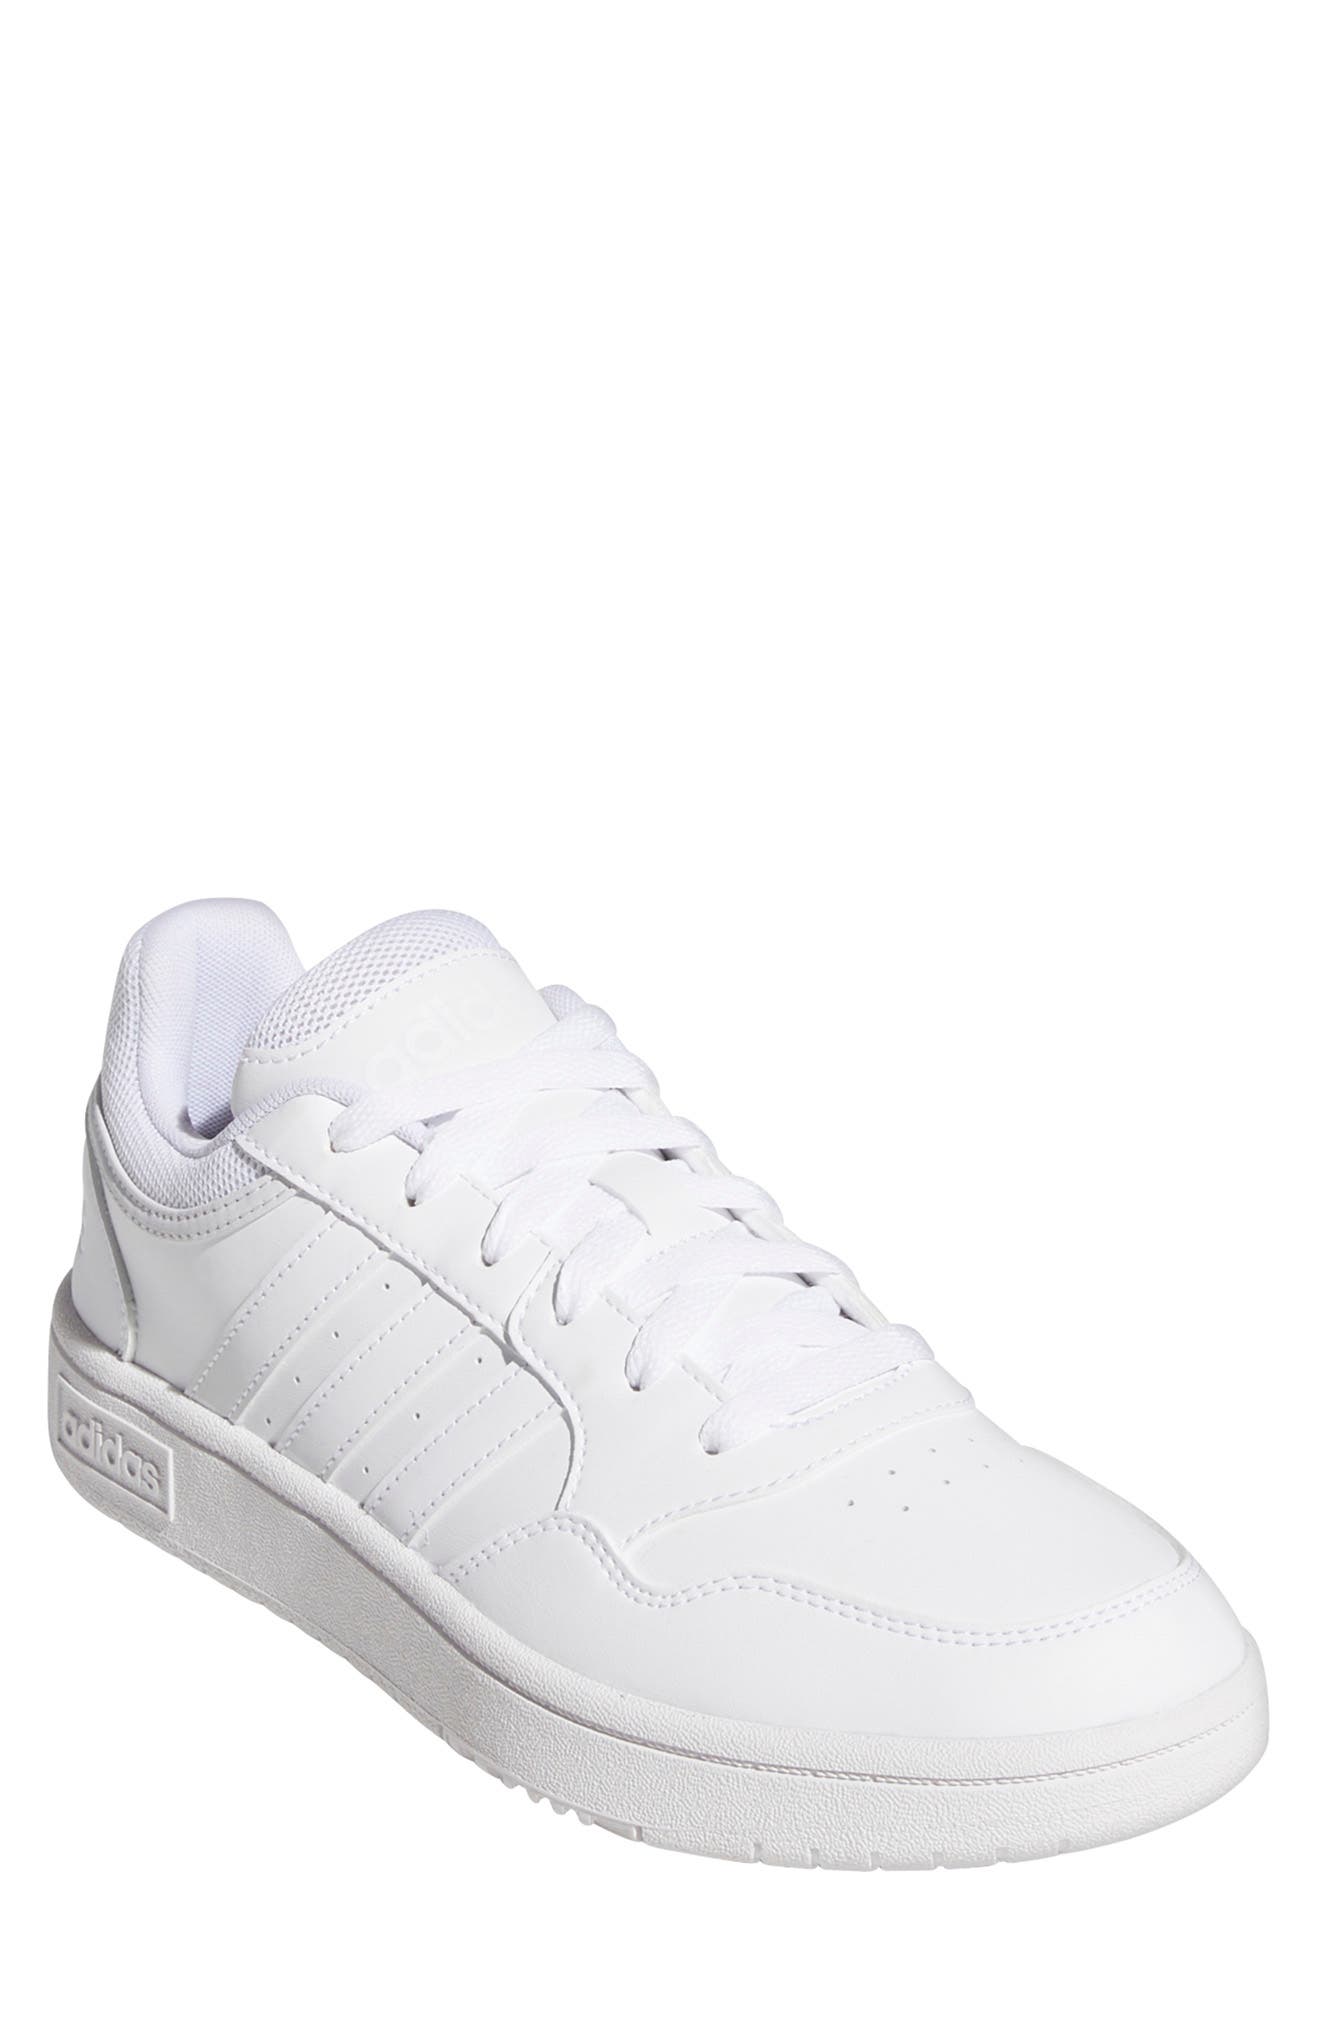 adidas shoes white sneakers